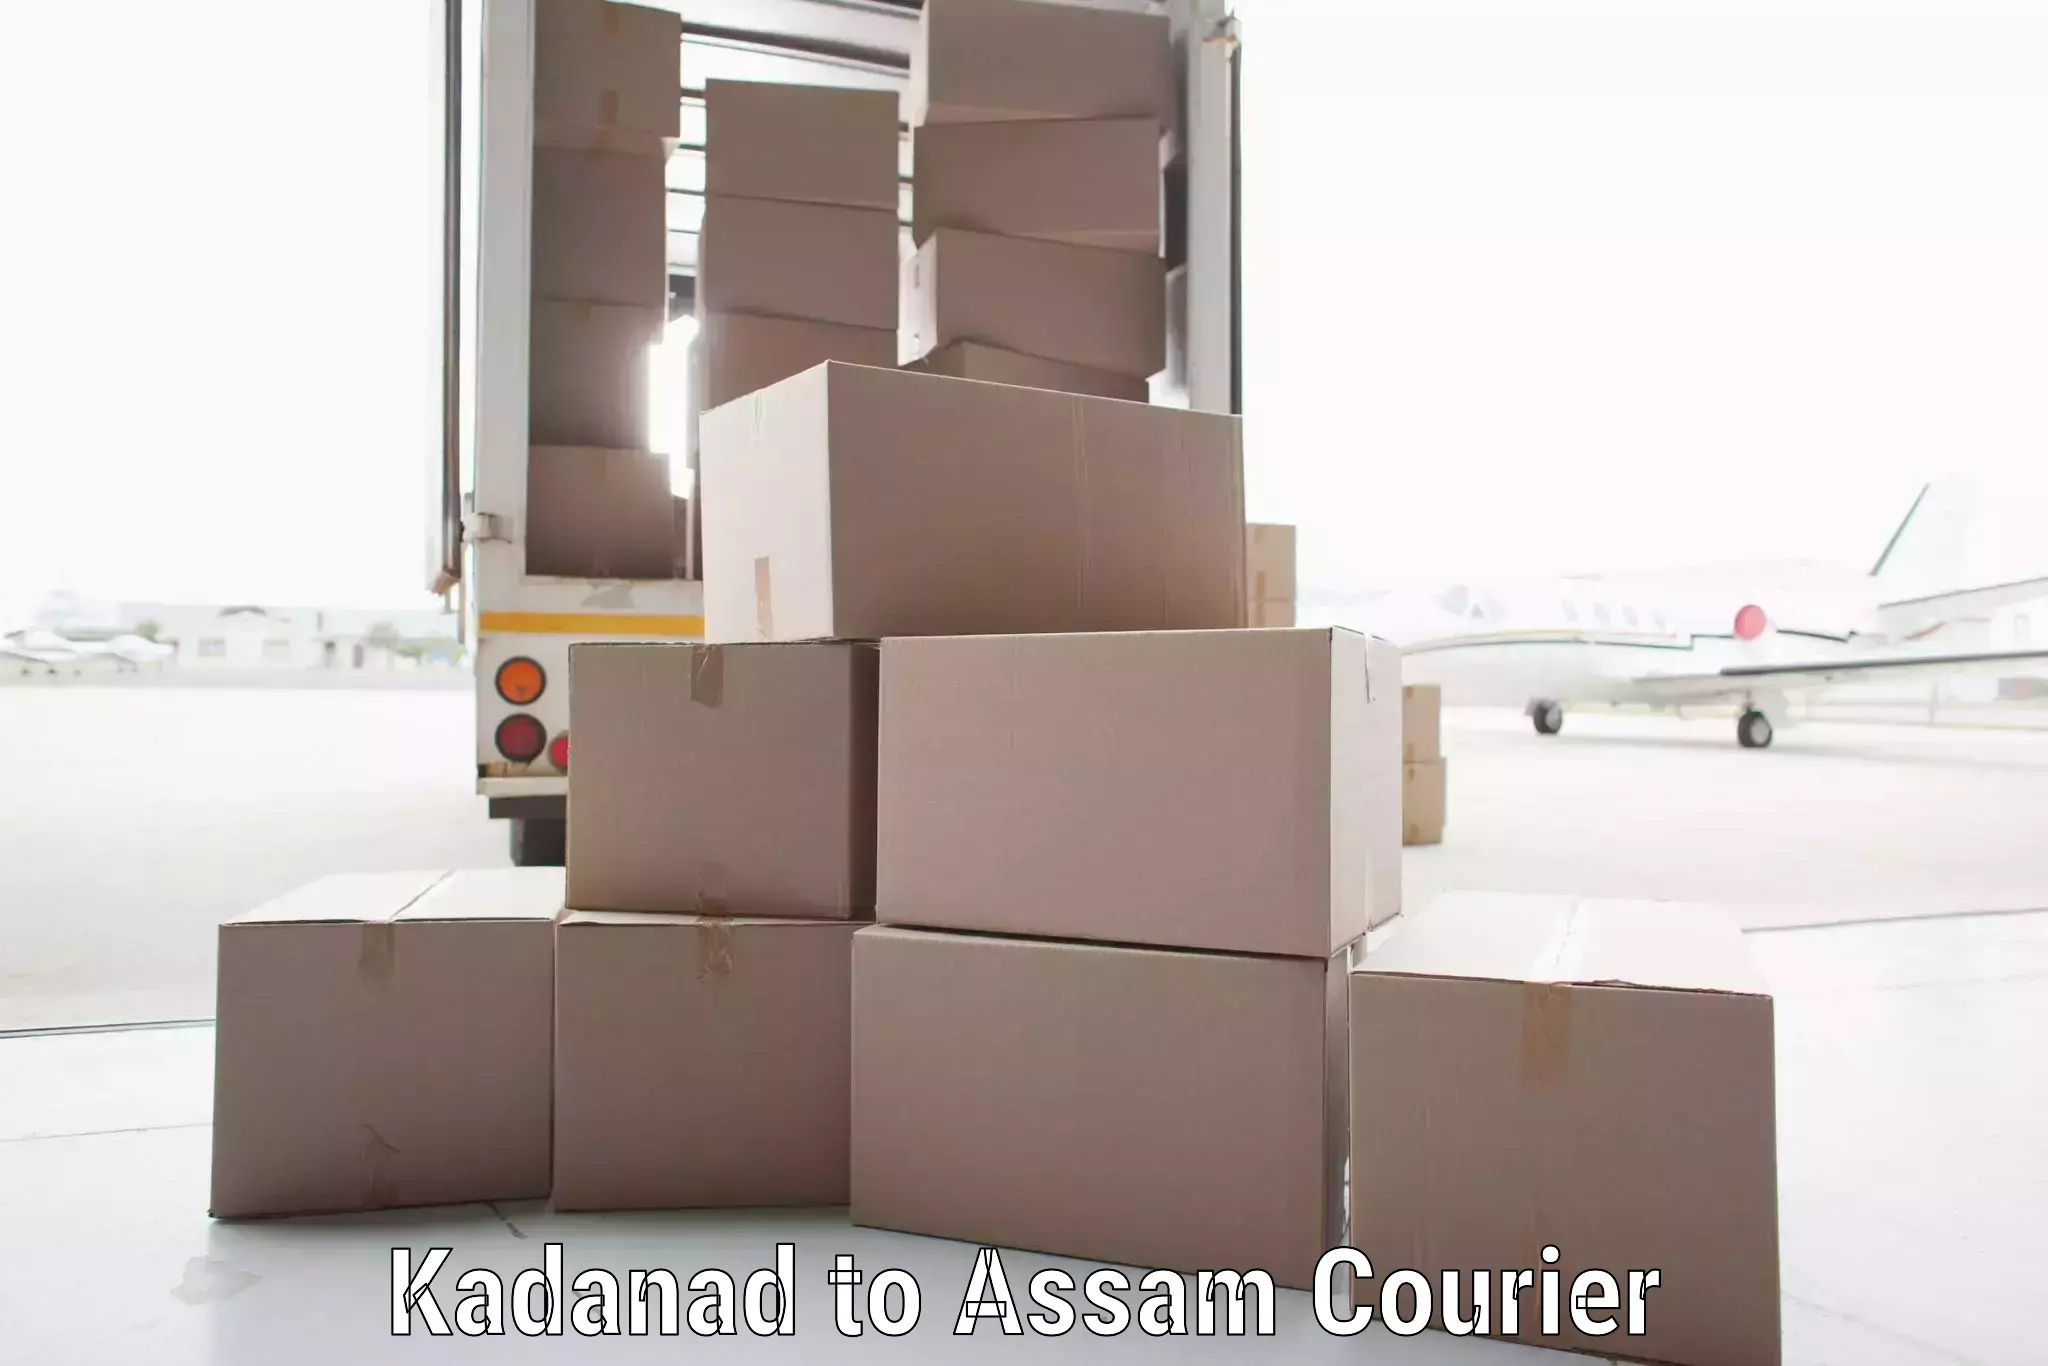 End-to-end delivery in Kadanad to Dibrugarh